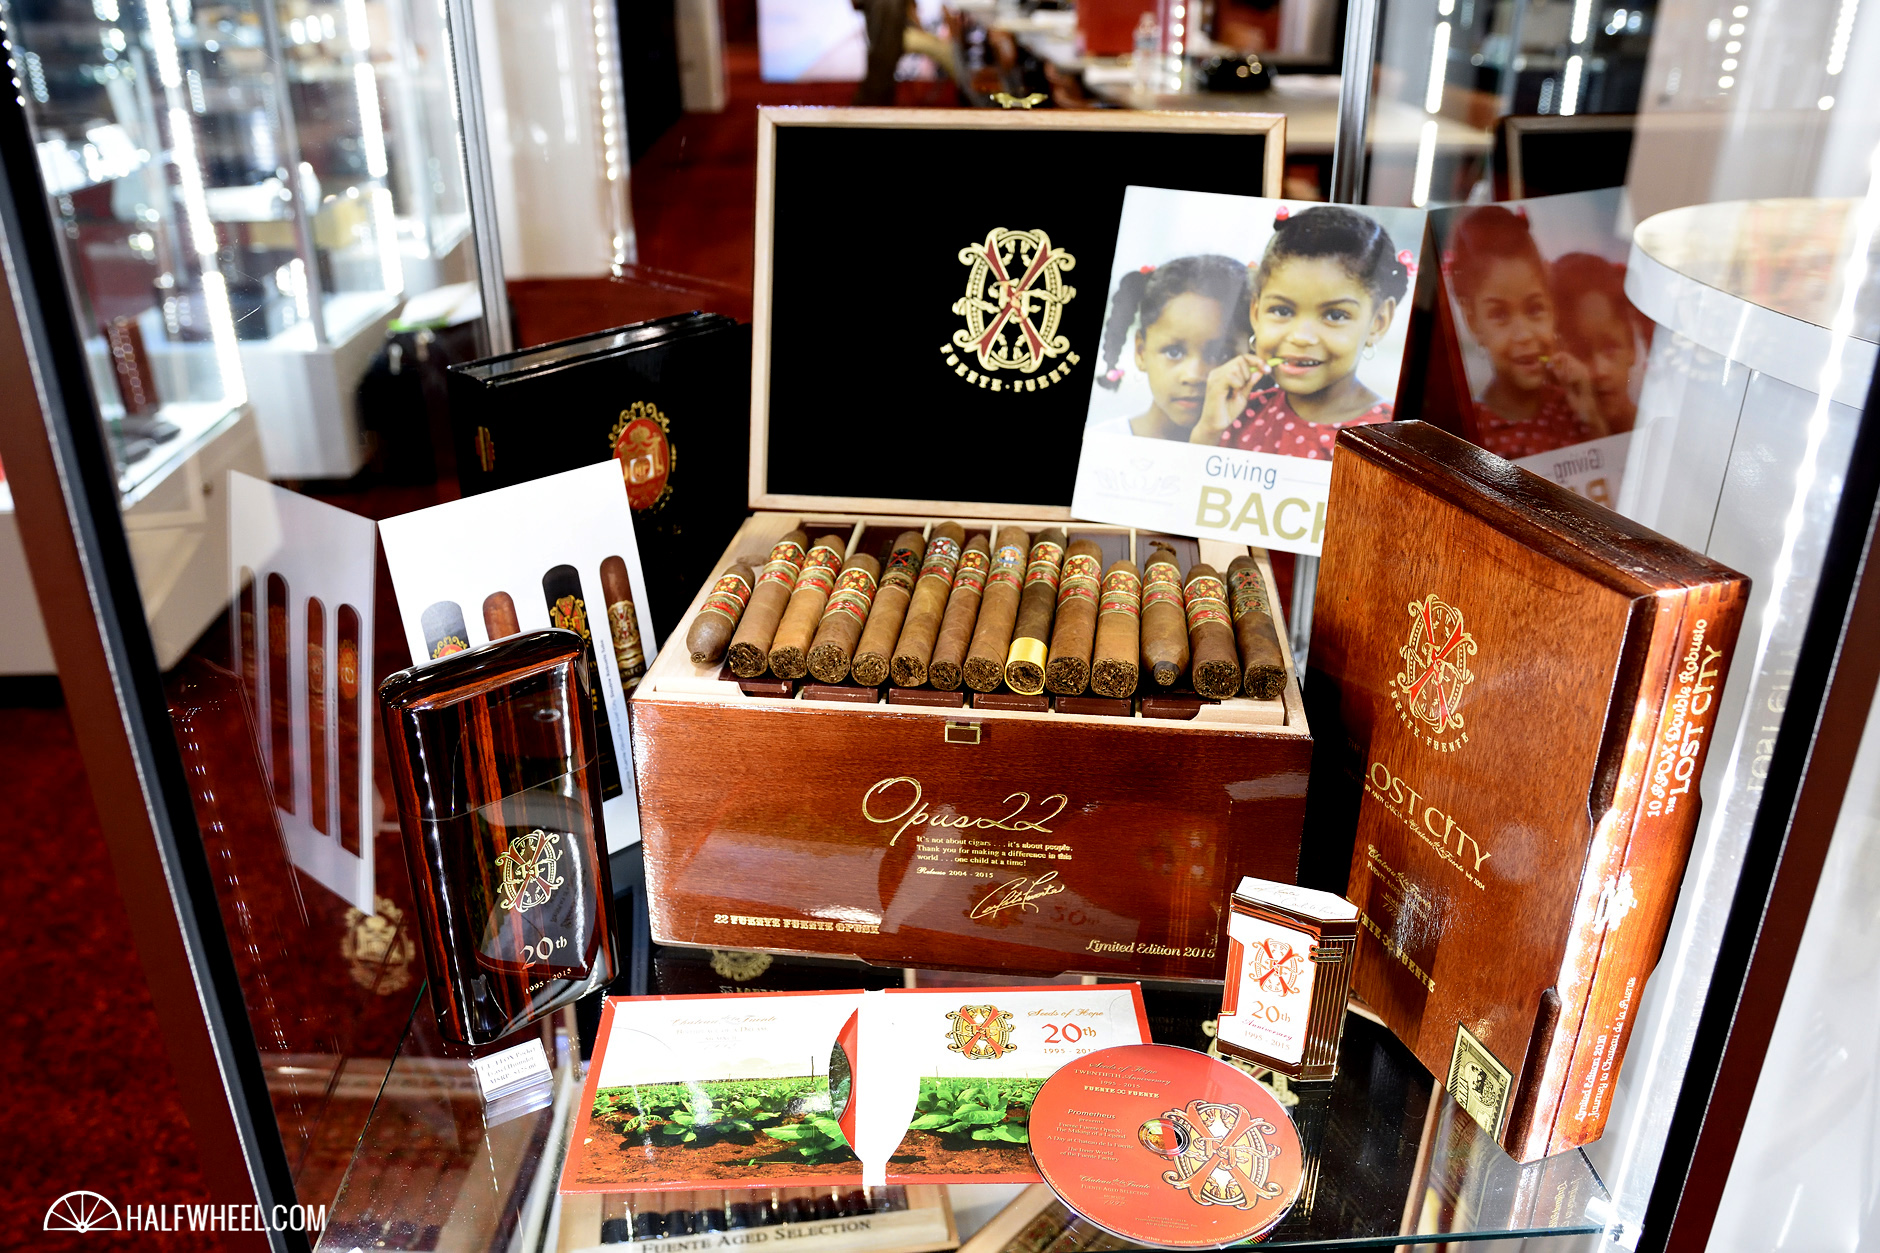 Prometheus 2016 Limited Edition Fuente Fuente OpusX Story Humidor IPCPR 2016